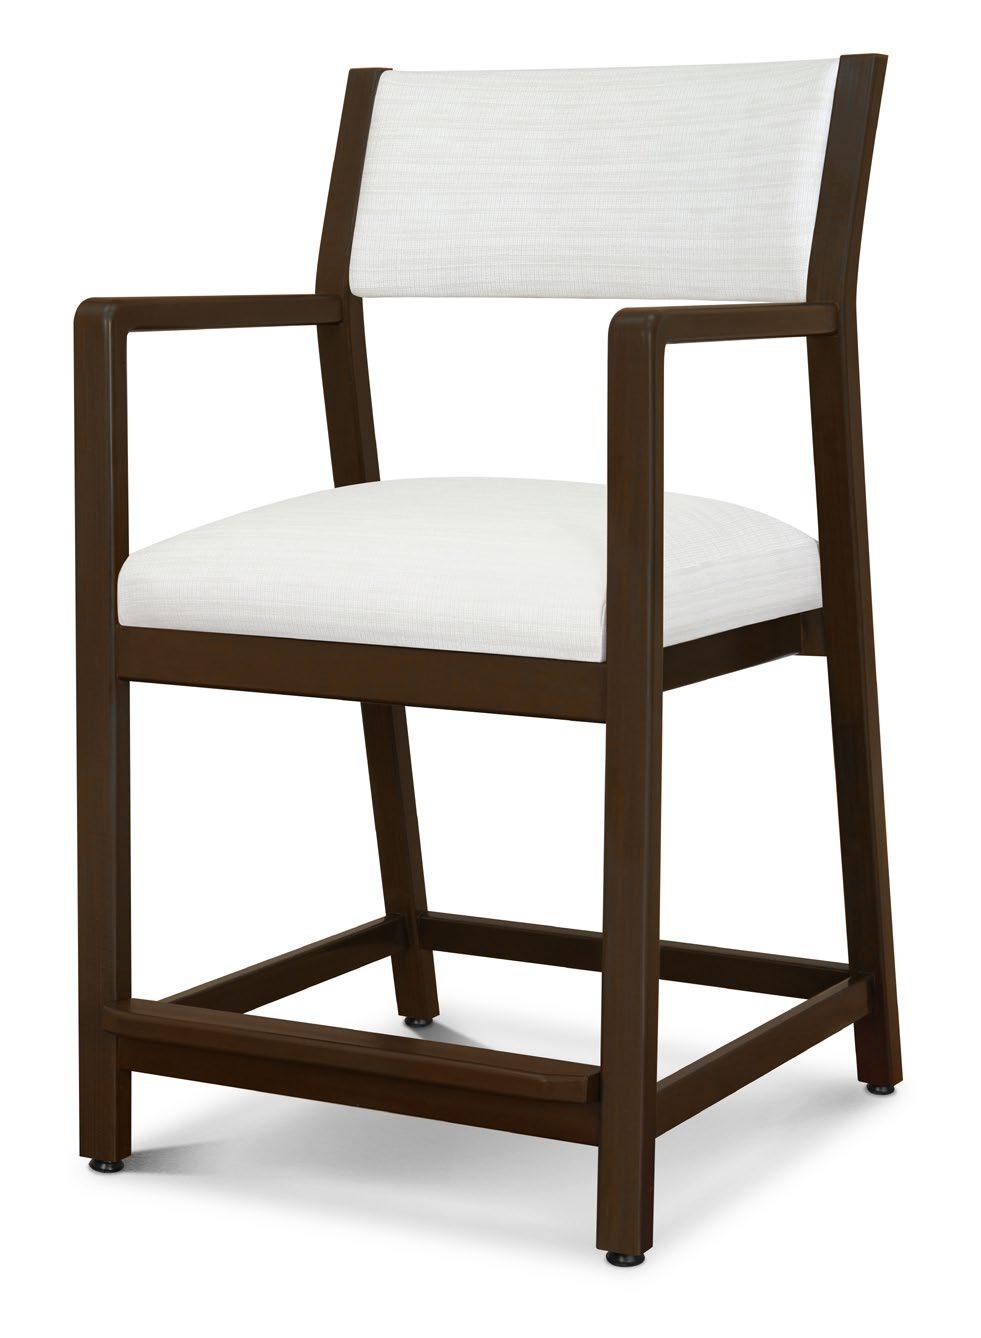 Caterina Easy Access Thoughtfully designed with a higher seat, the Caterina Easy Access chair allows you to sit without